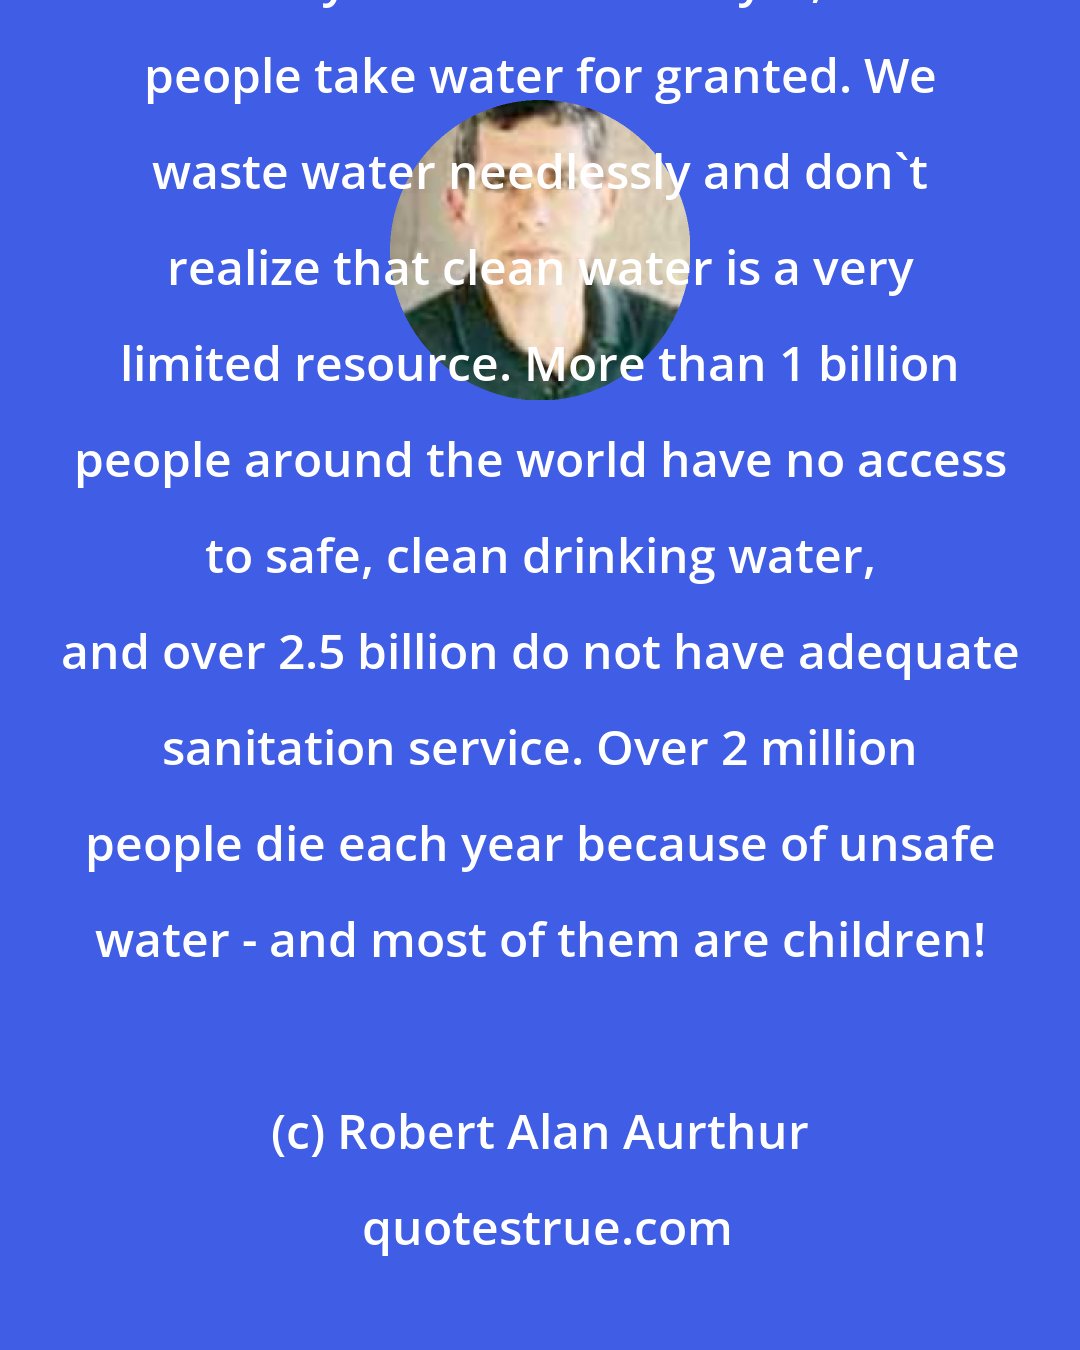 Robert Alan Aurthur: Water is one of the most basic of all needs - we cannot live for more than a few days without it. And yet, most people take water for granted. We waste water needlessly and don't realize that clean water is a very limited resource. More than 1 billion people around the world have no access to safe, clean drinking water, and over 2.5 billion do not have adequate sanitation service. Over 2 million people die each year because of unsafe water - and most of them are children!